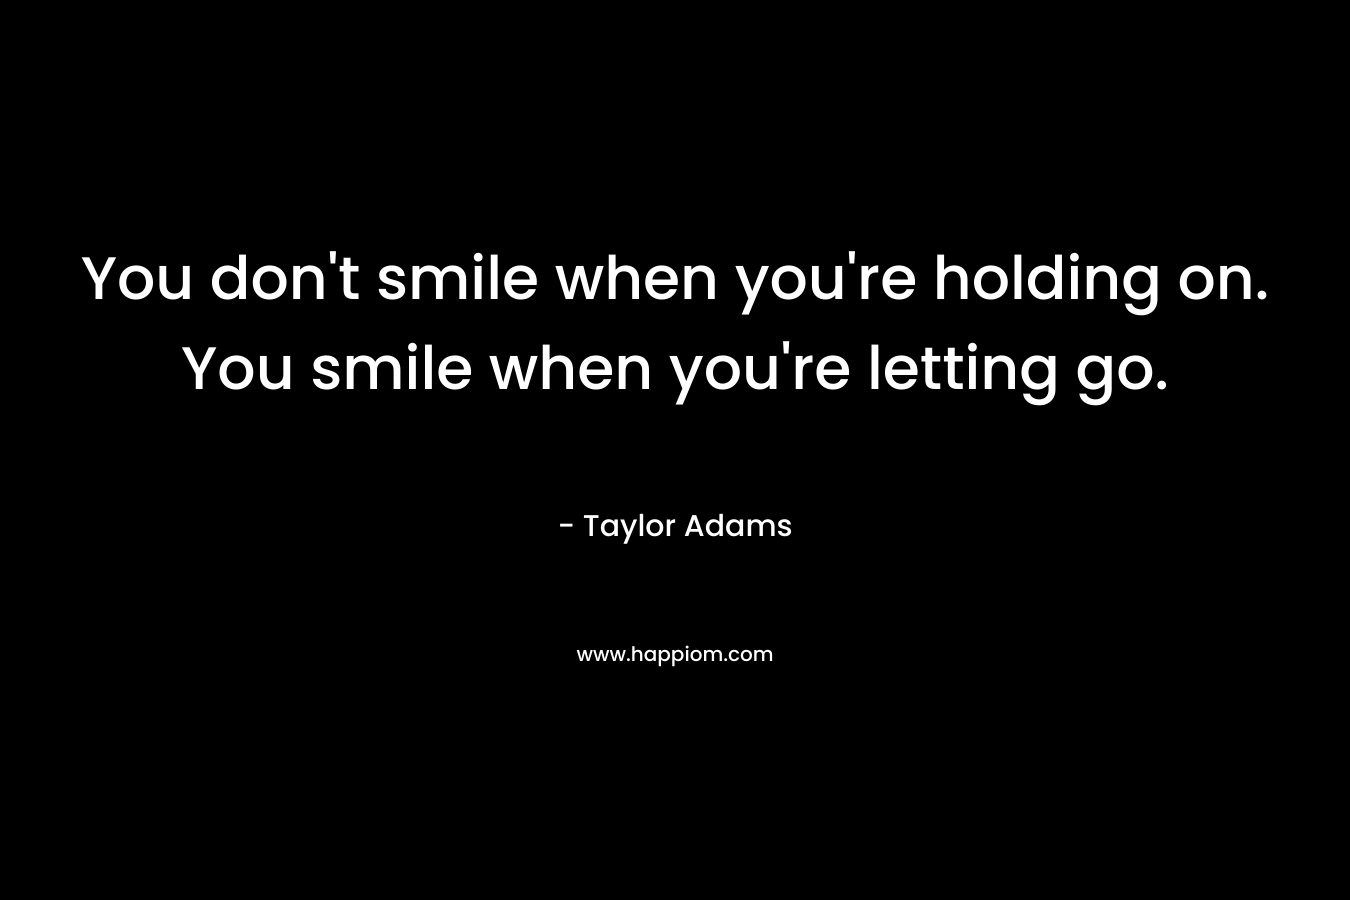 You don’t smile when you’re holding on. You smile when you’re letting go. – Taylor Adams